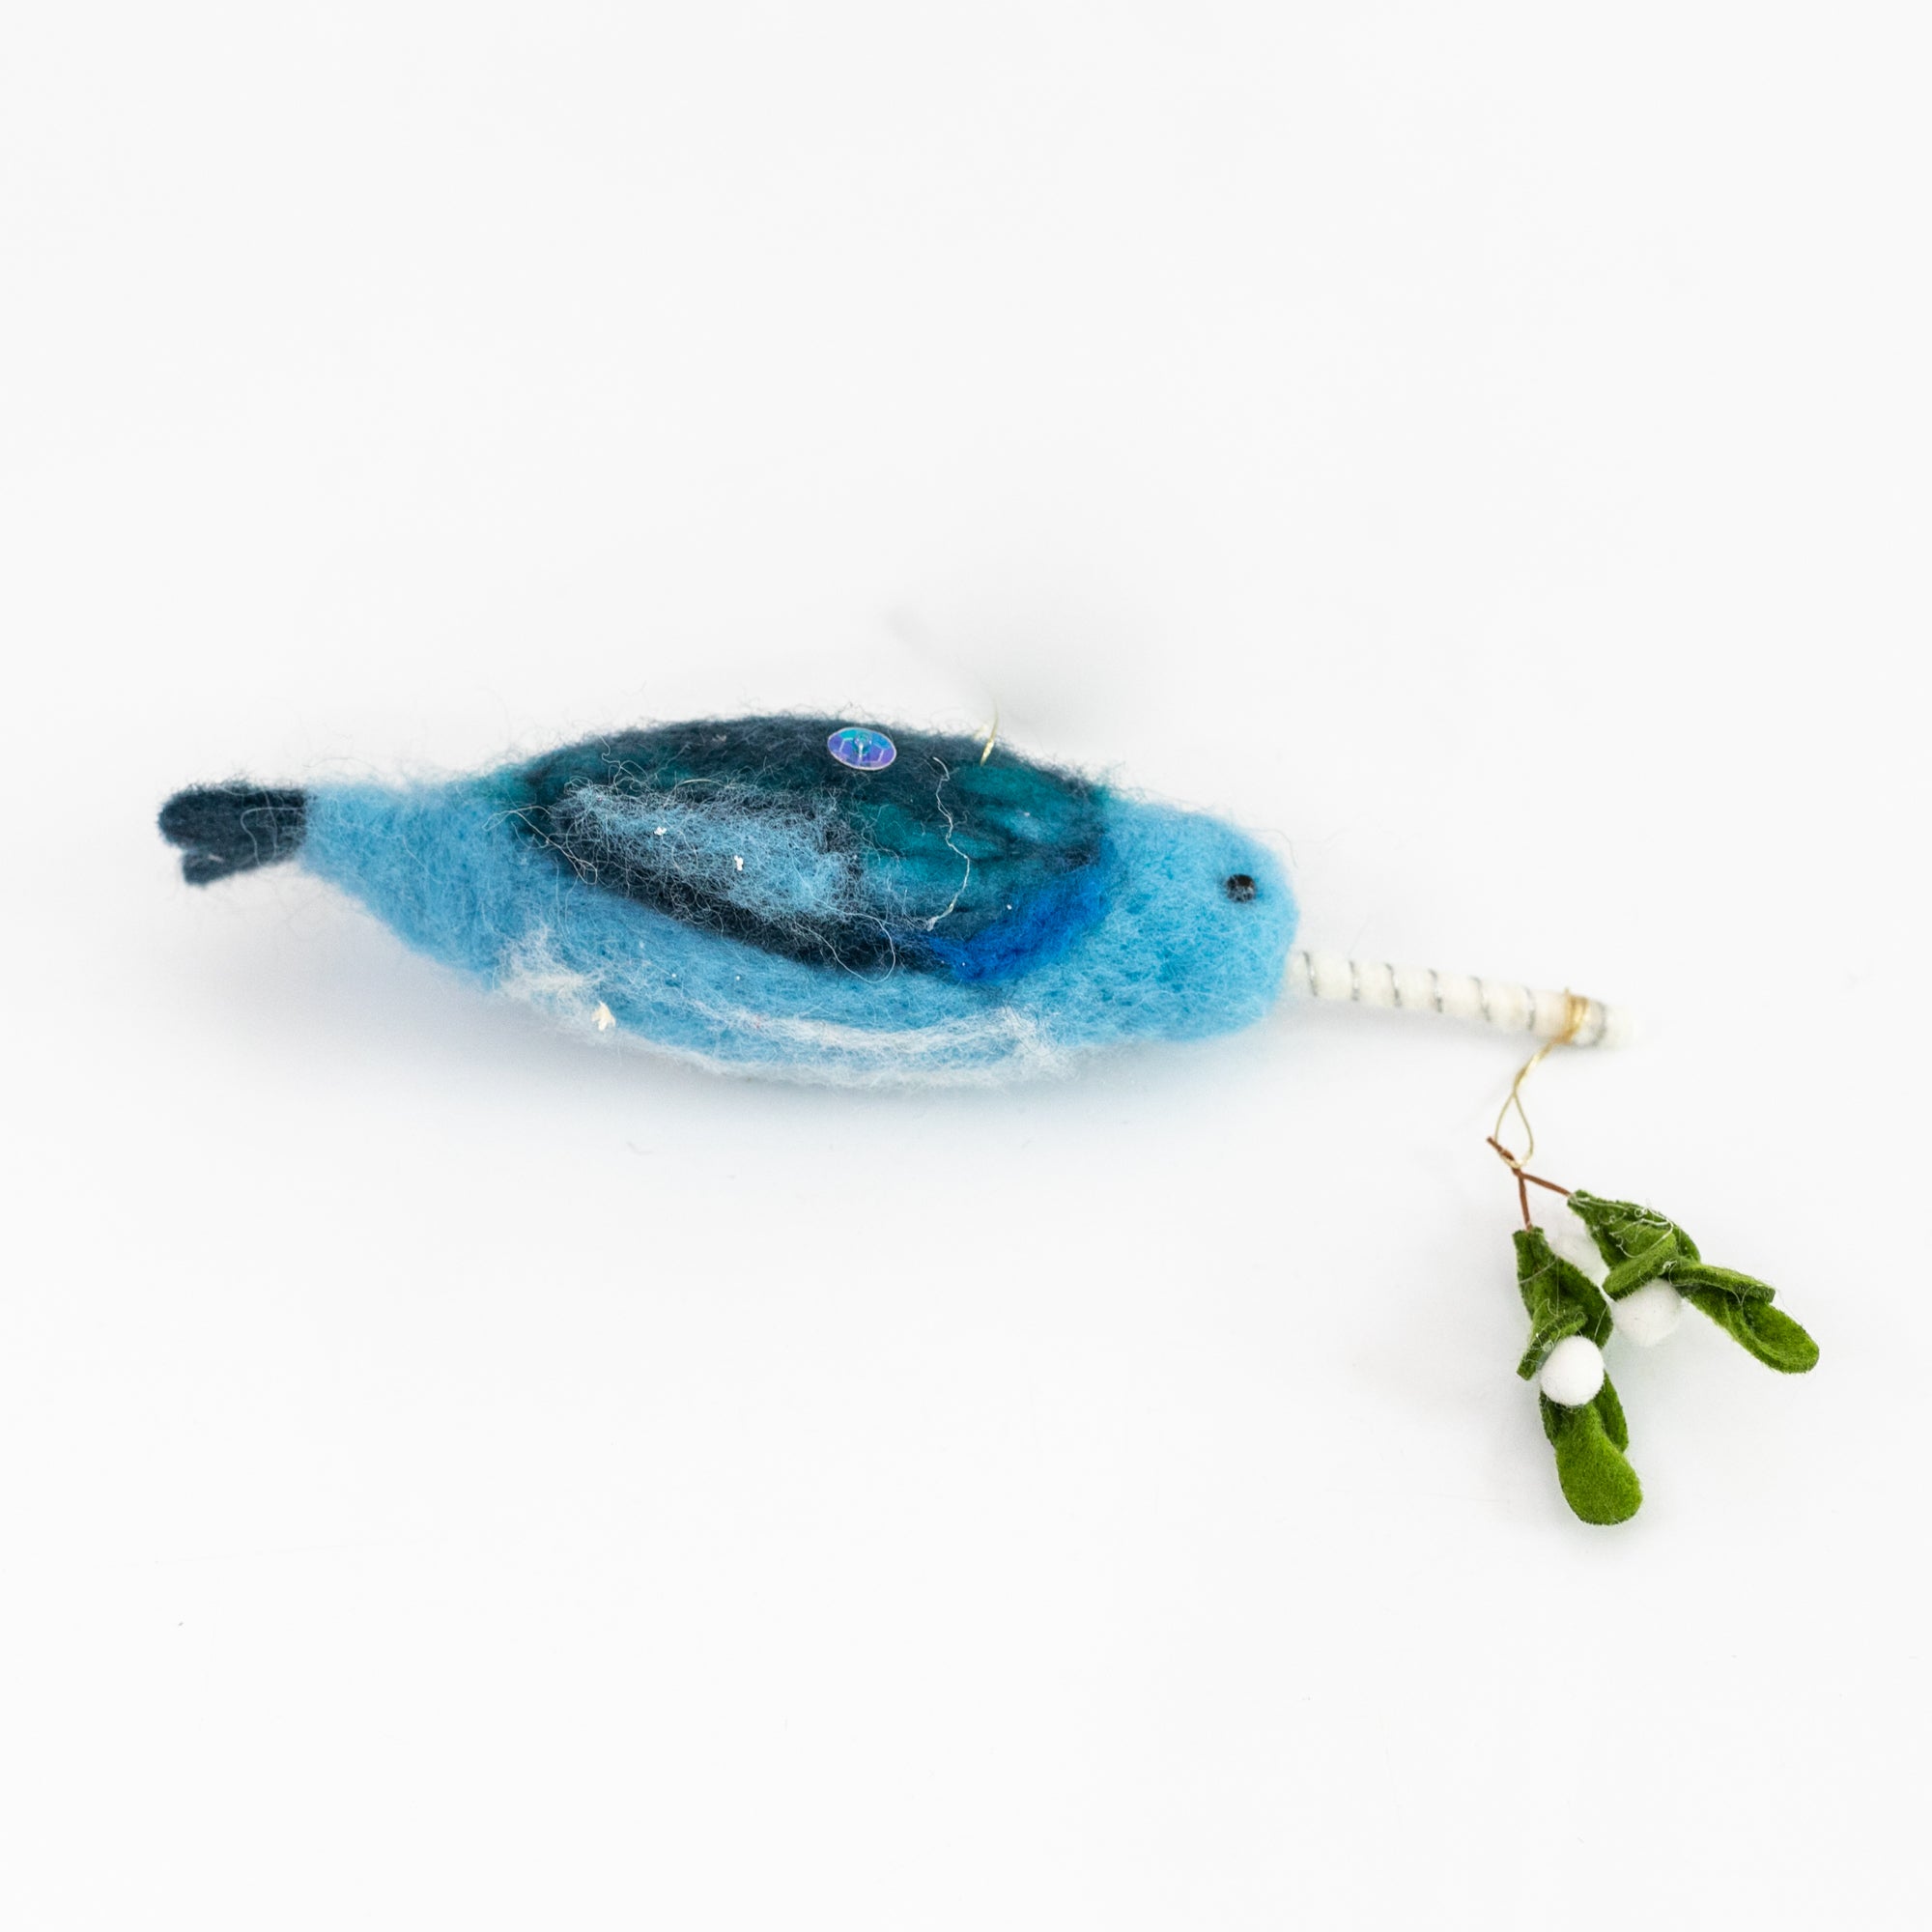 Narwhal Ornament with Mistletoe